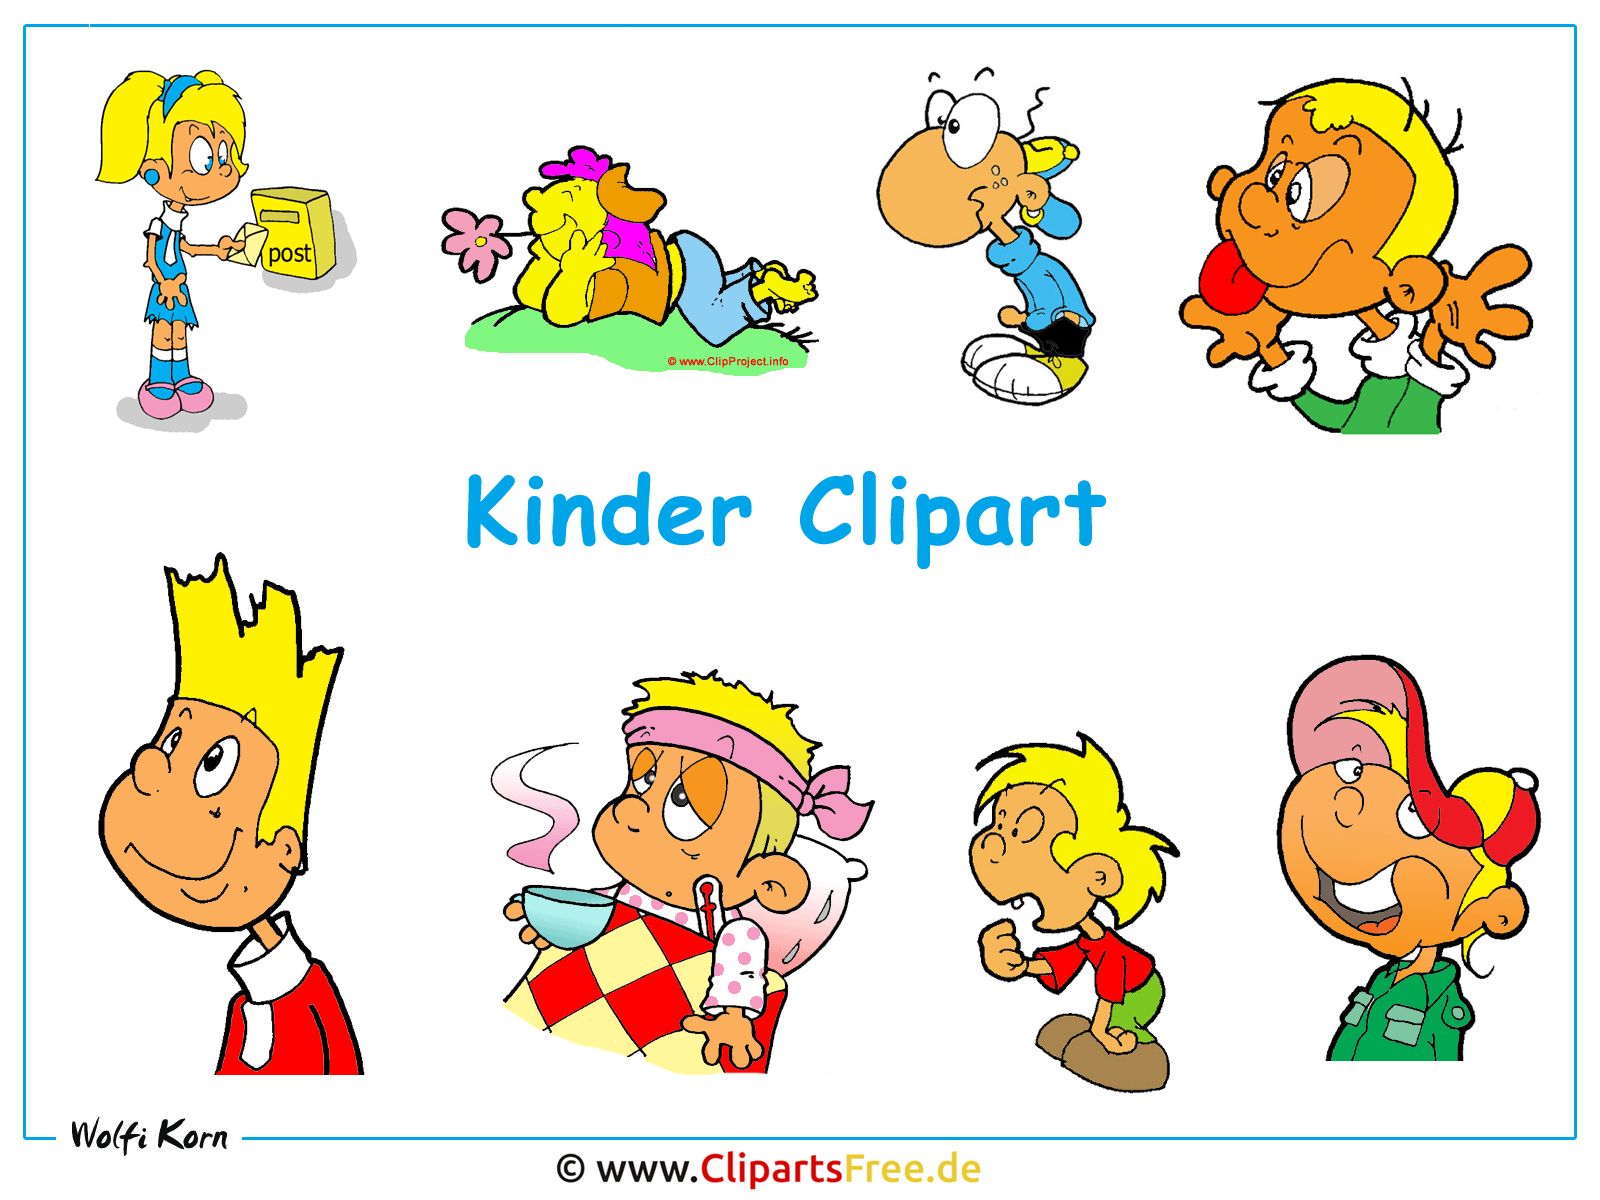 downloadable clipart for free - photo #5